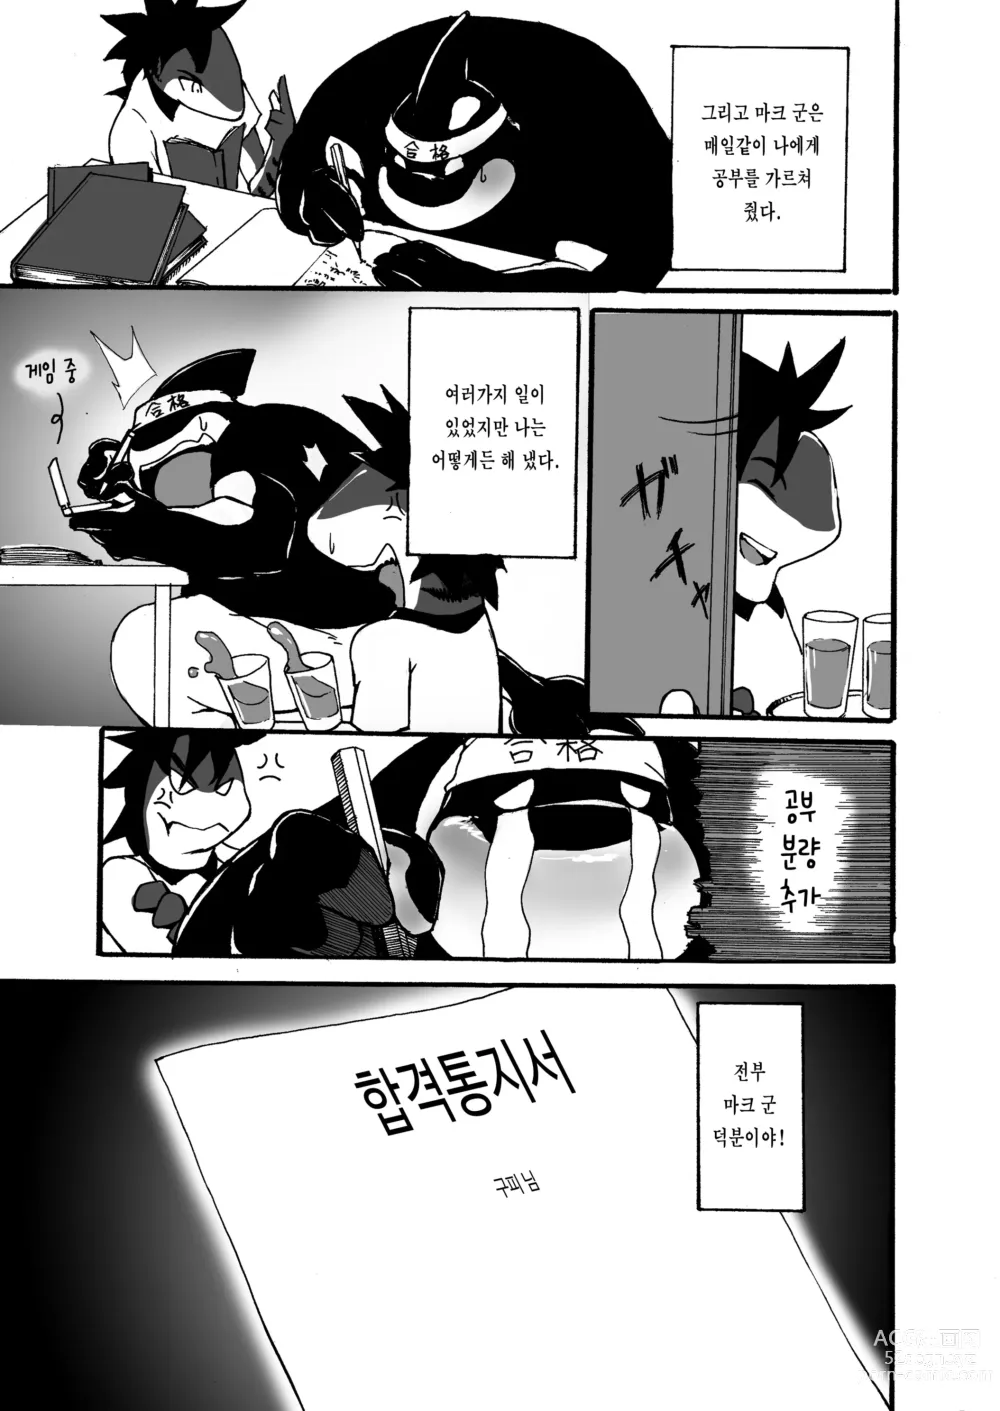 Page 31 of doujinshi 오션 라이프 0